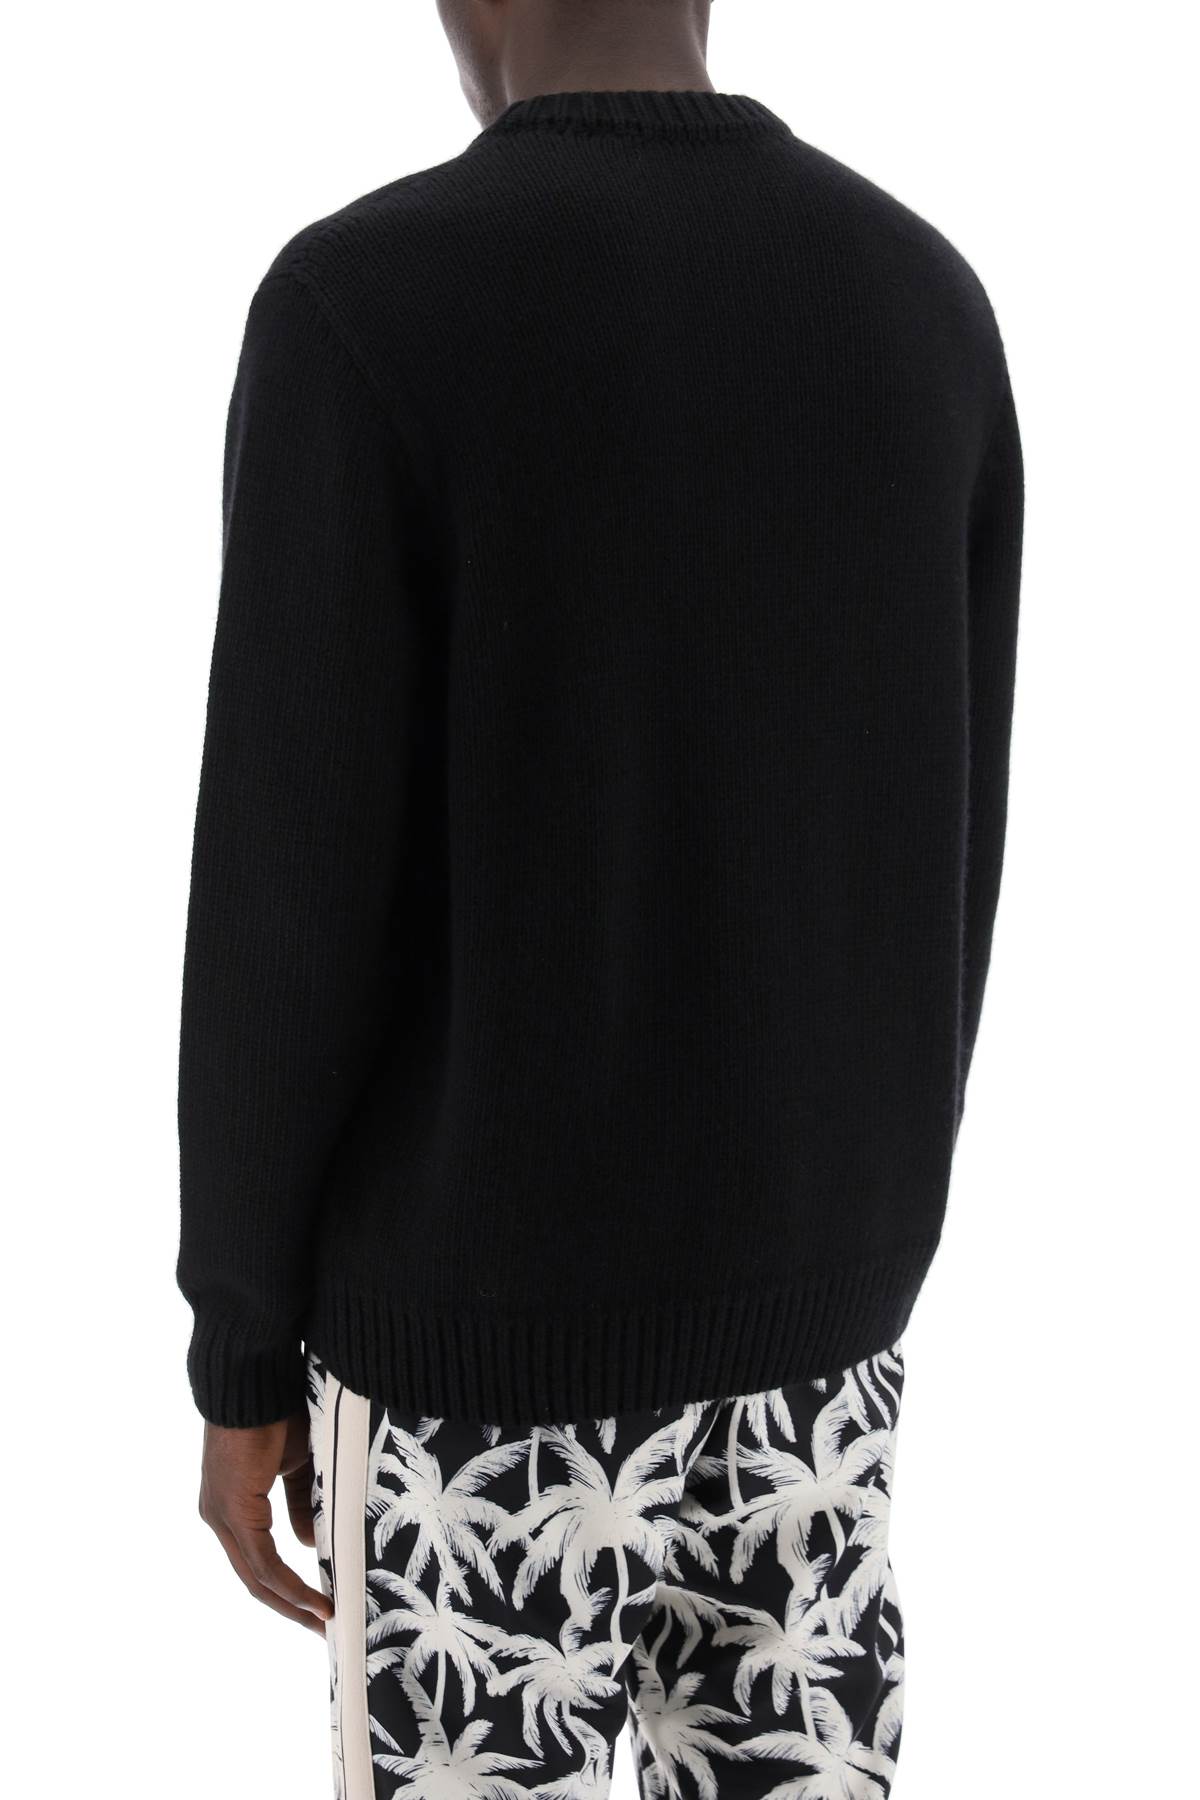 PALM ANGELS Men's Black Wool and Cashmere Pullover with Monogram Embellishment